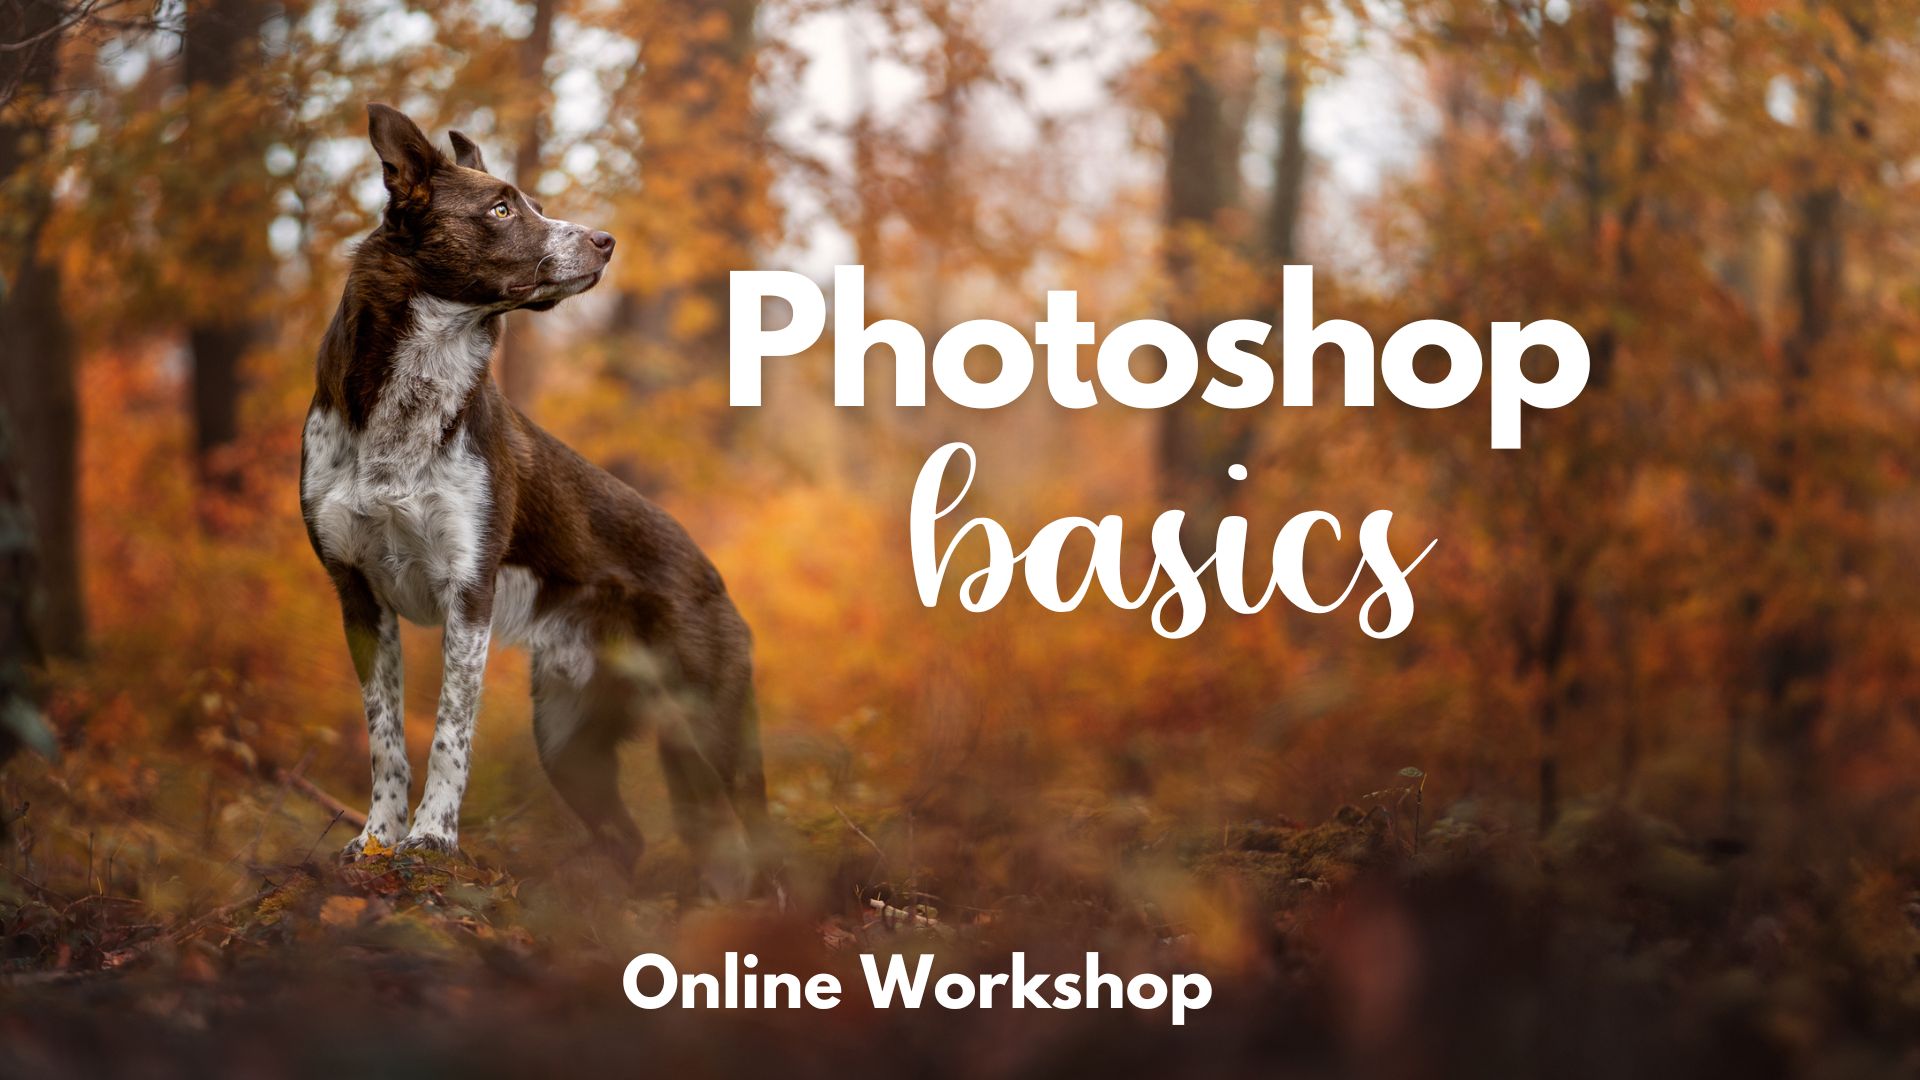 Learn Photoshop foundation skills through an online webinar workshop covering editing techniques.